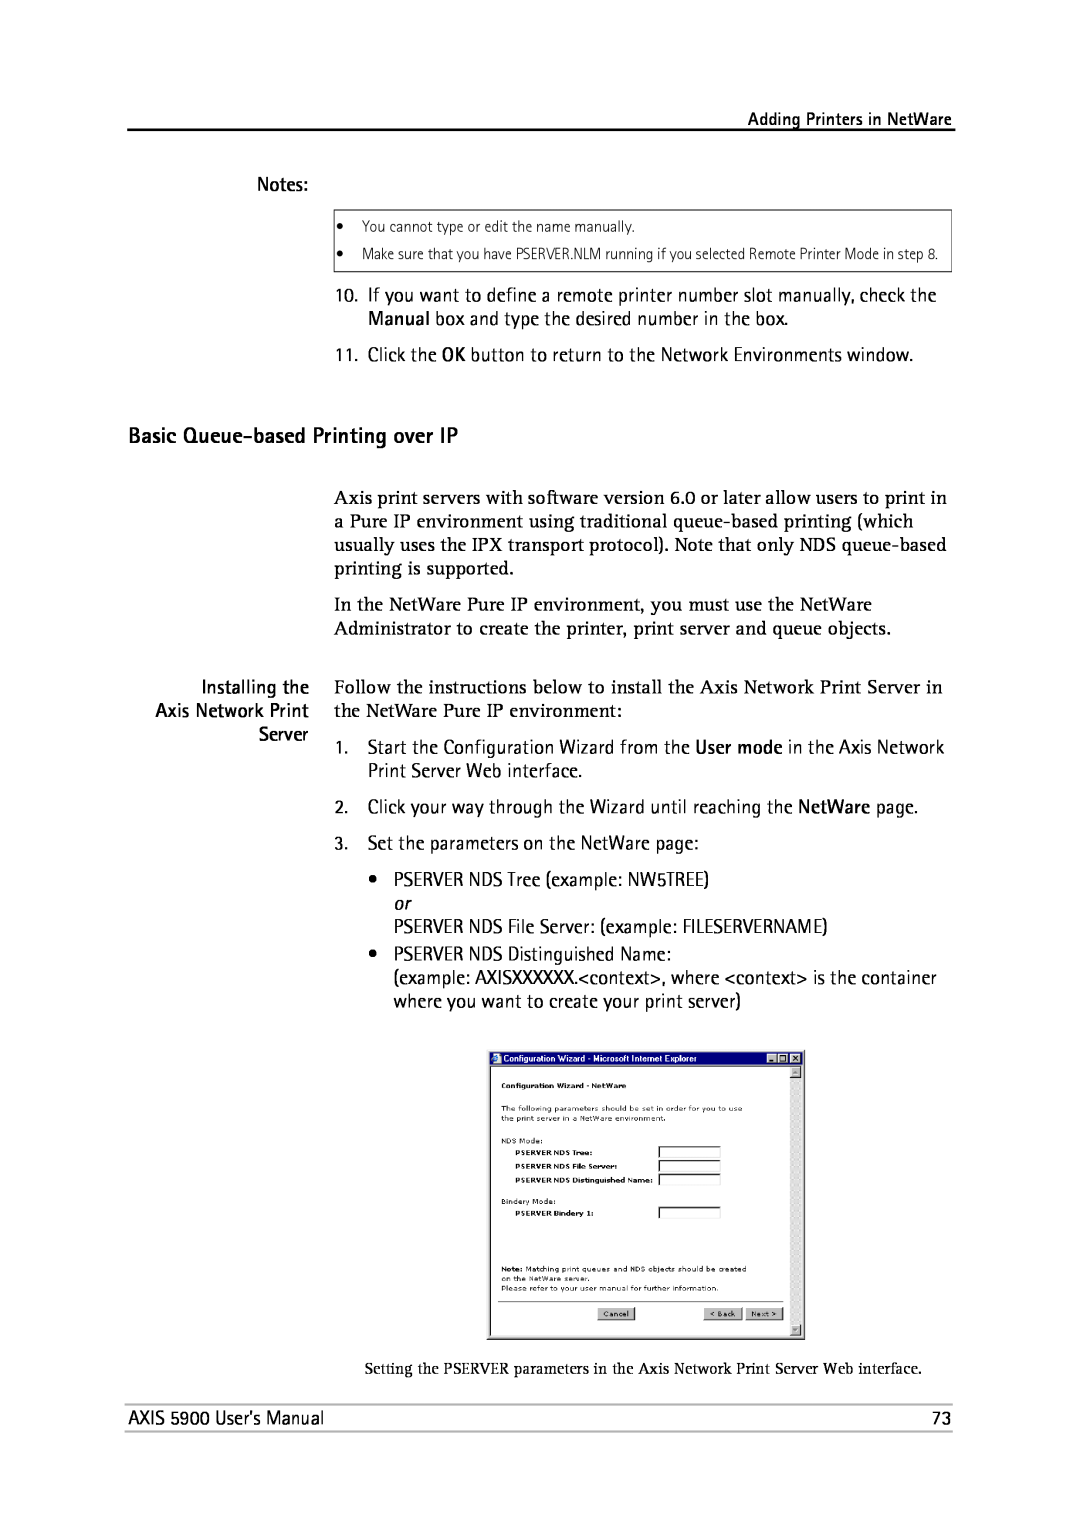 Philips 5900 user manual Basic Queue-based Printing over IP, Installing the Axis Network Print Server 